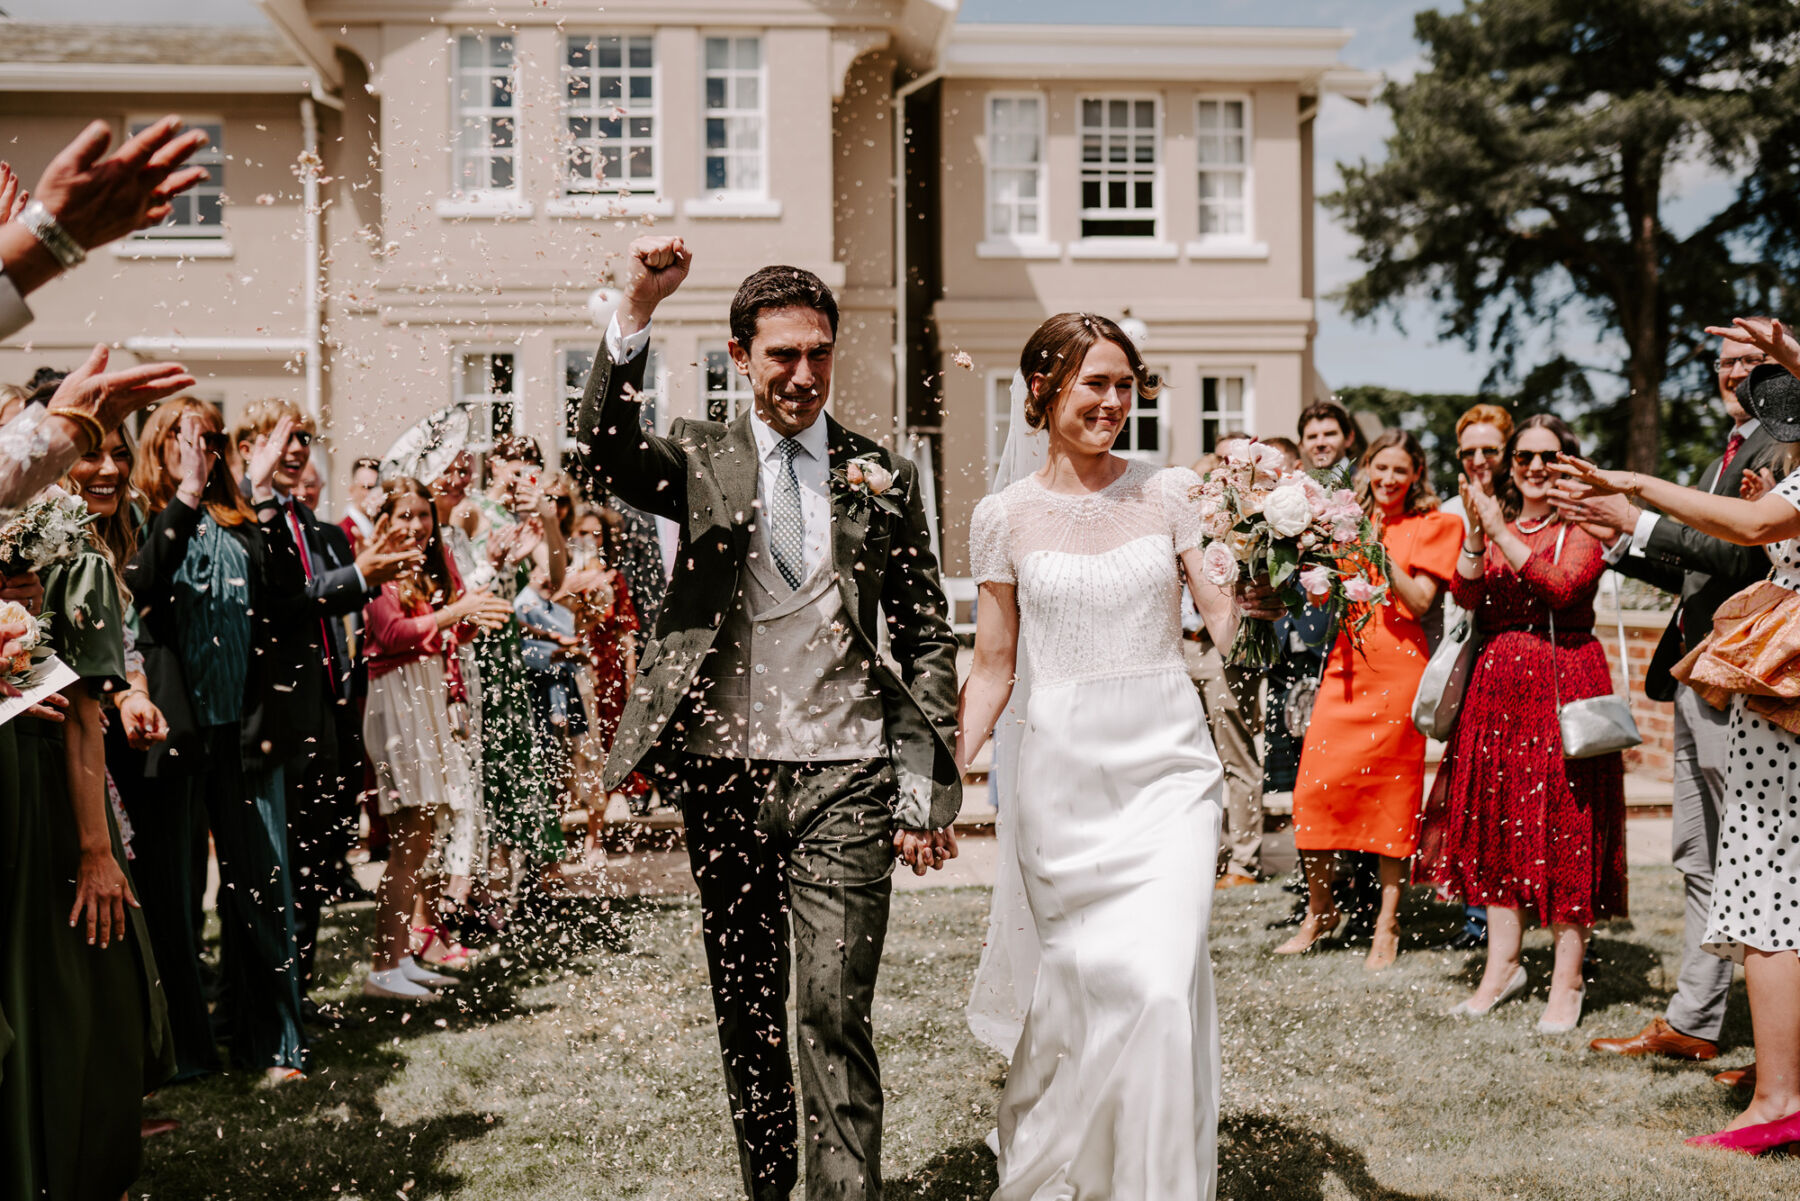 Bride wearing a Jenny Packham dress exiting her ceremony under a shower of confetti